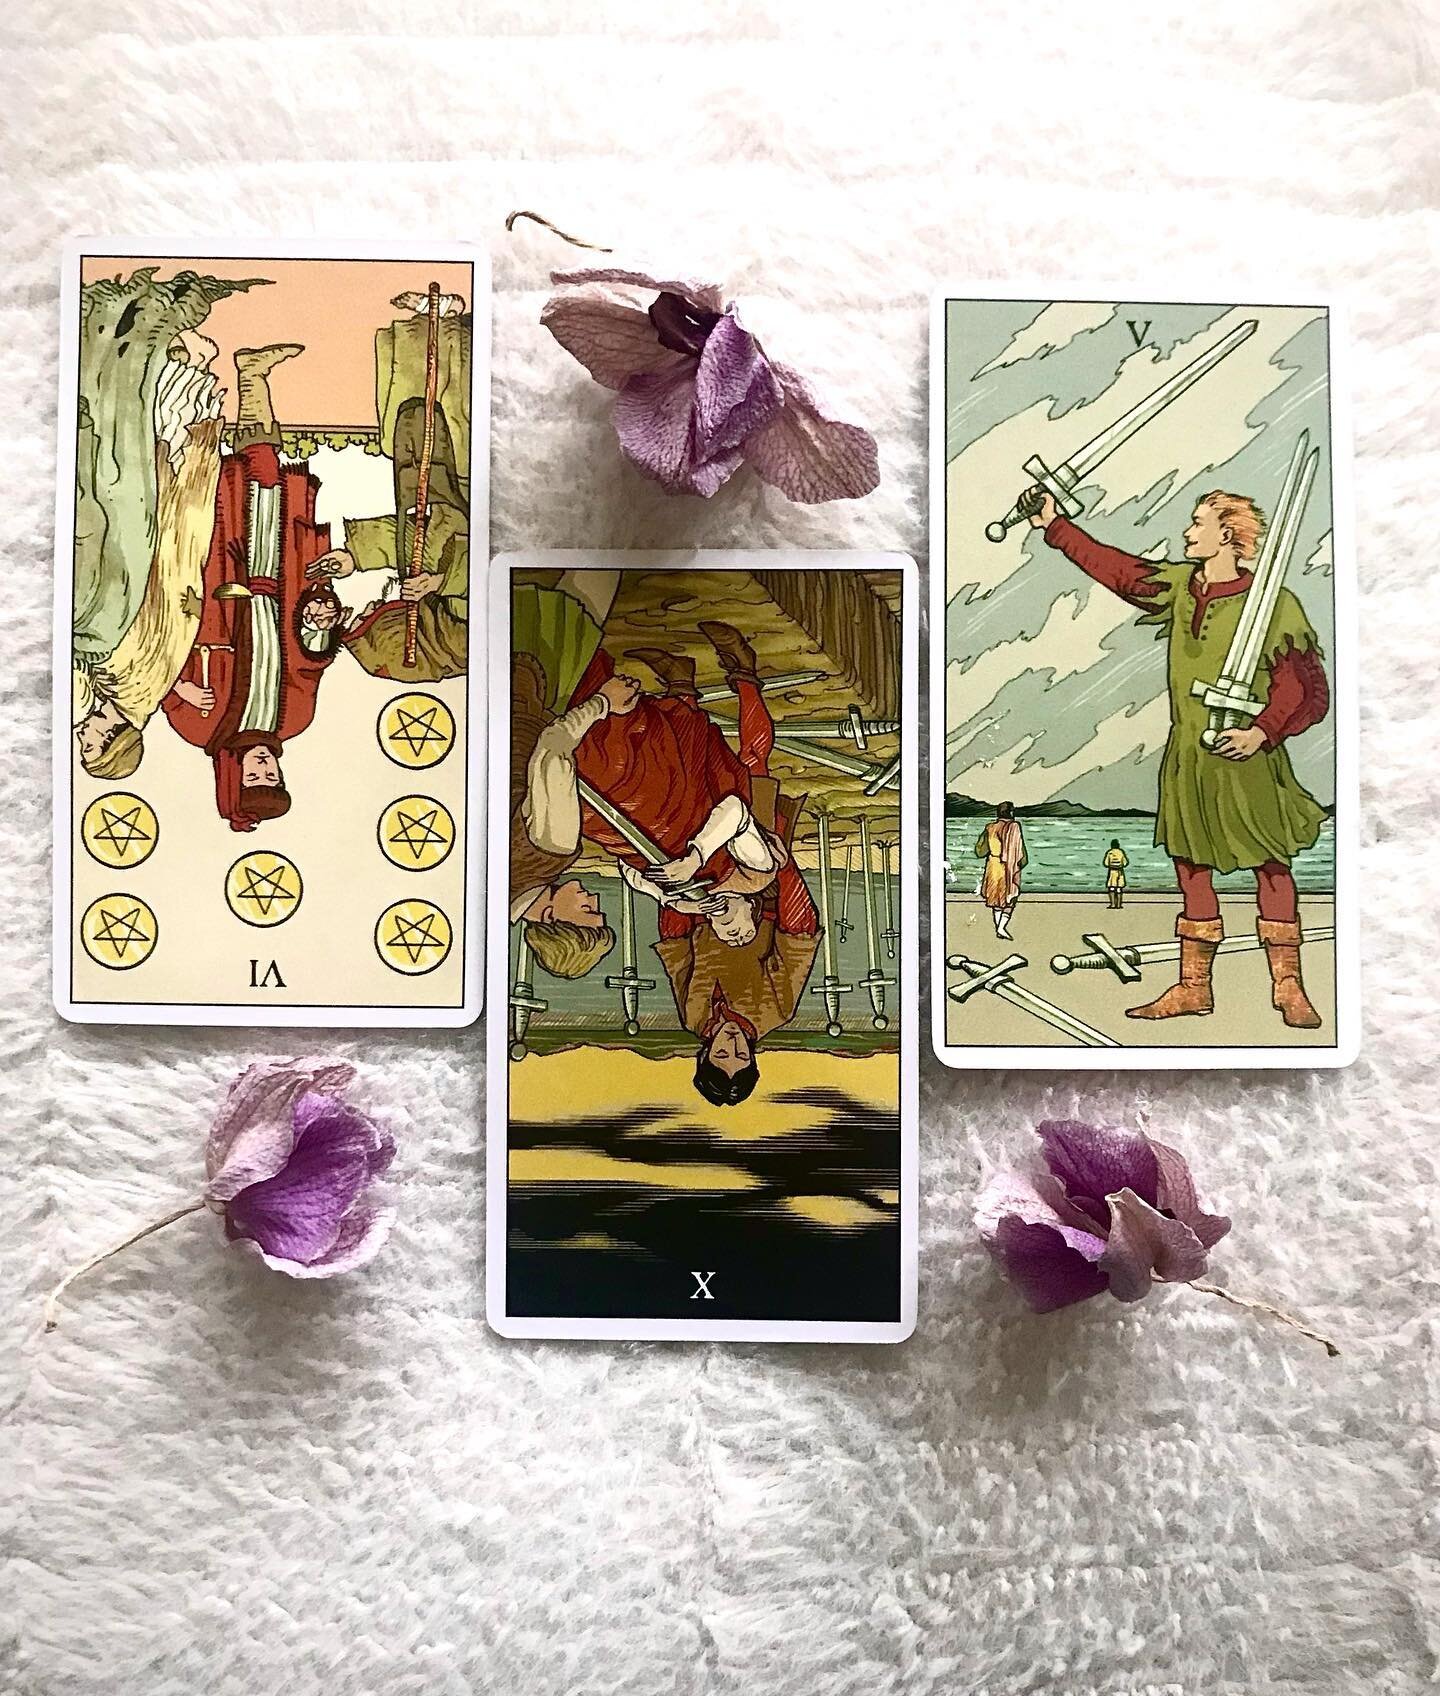 ✨Message for Week Ahead✨

We are in the last week of Mercury retrograde but also Uranus, the planet of surprises and disruptions, comes into an exact square with Saturn, the planet of rules, regulations, structure, and longstanding traditions and ins